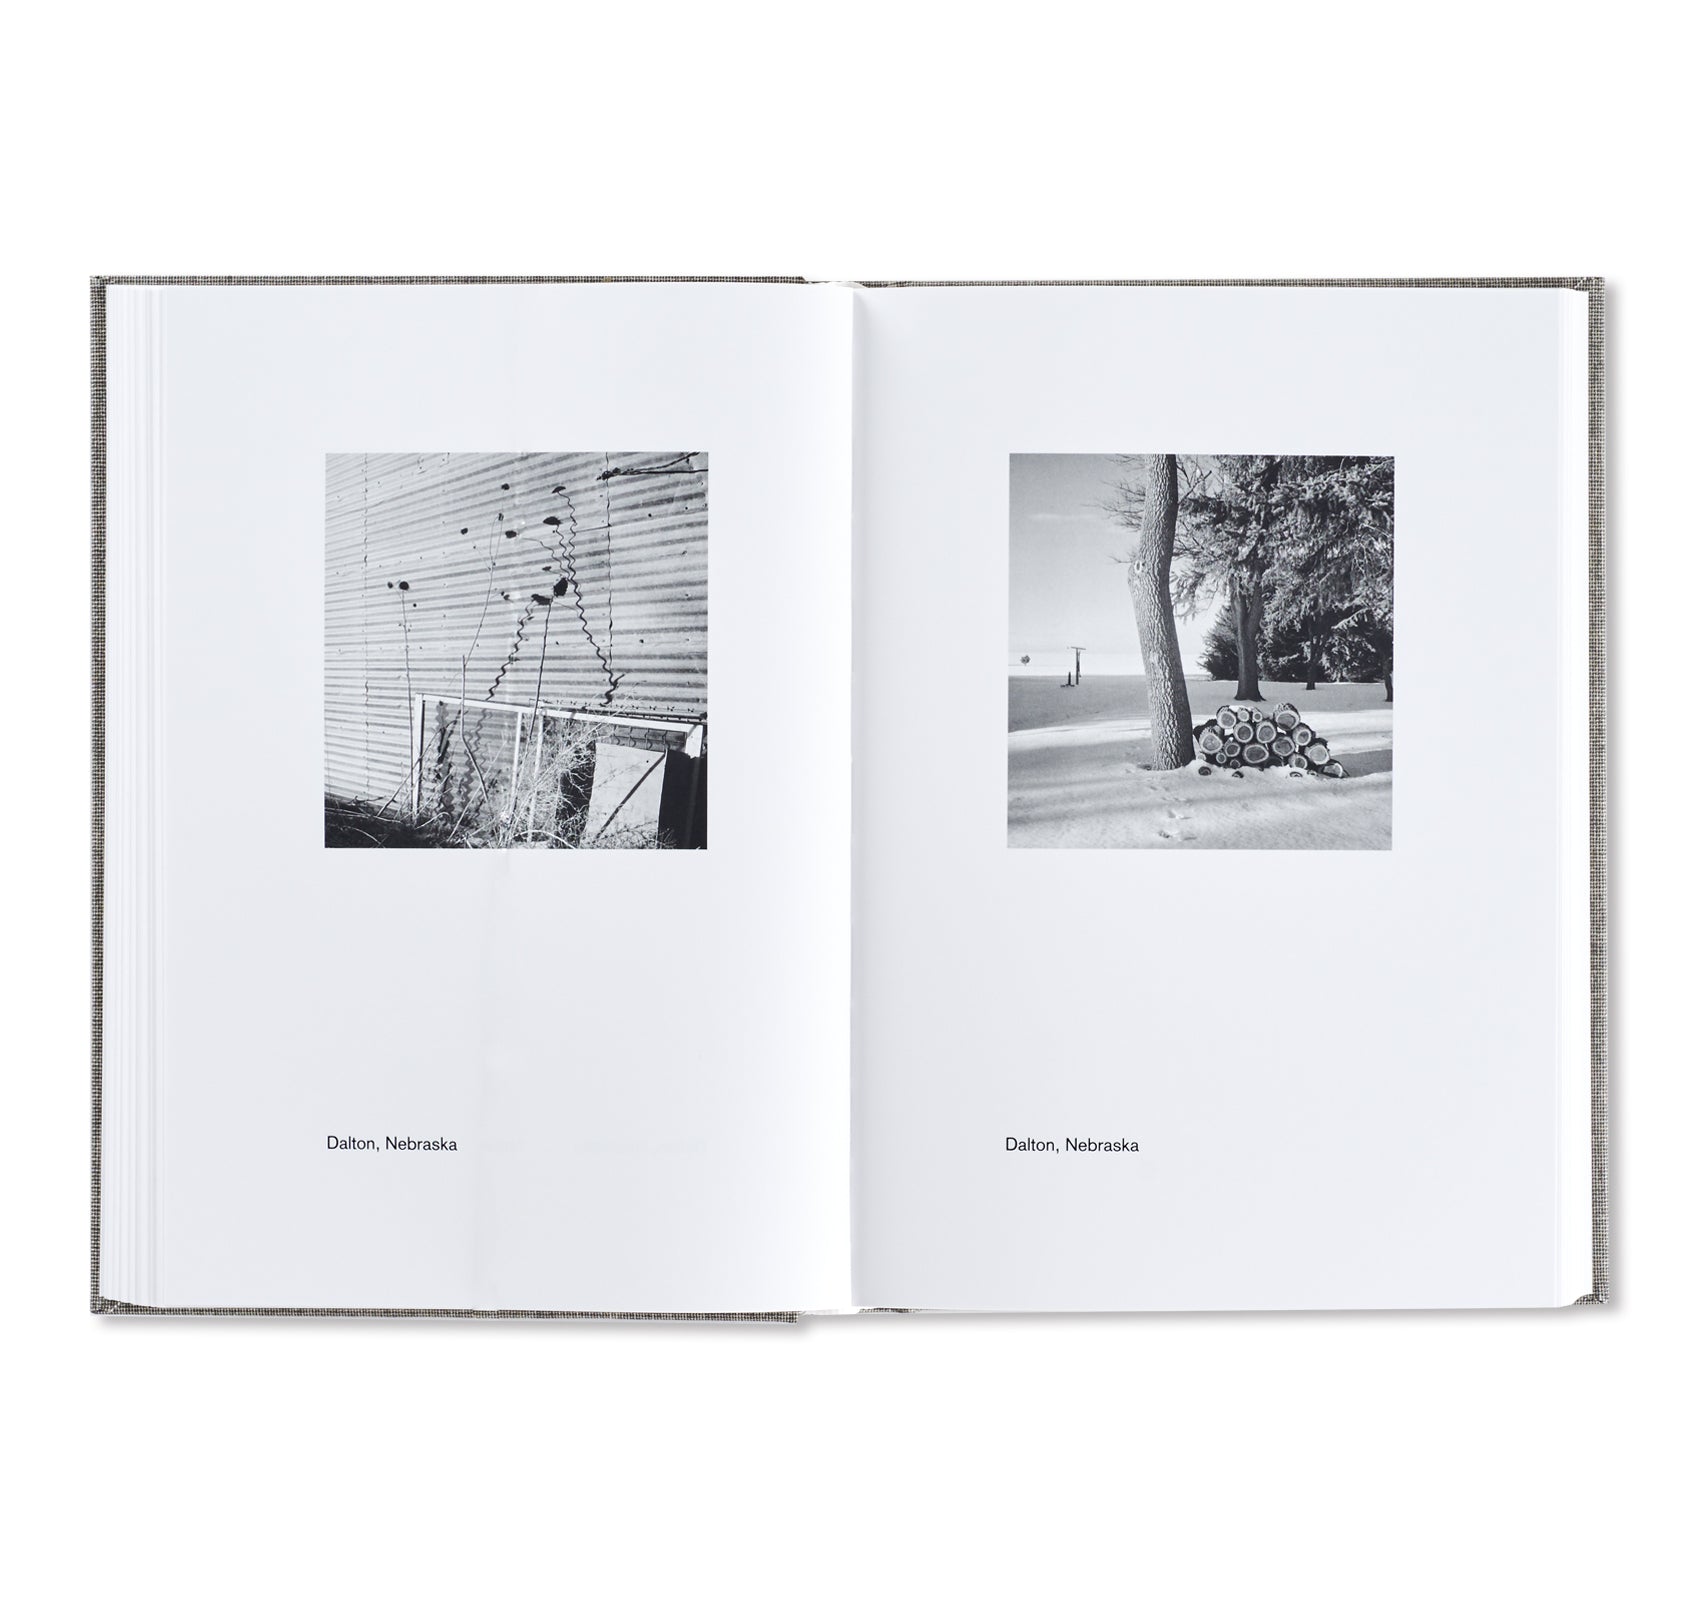 AMERICAN WINTER by Gerry Johansson [SPECIAL EDITION]